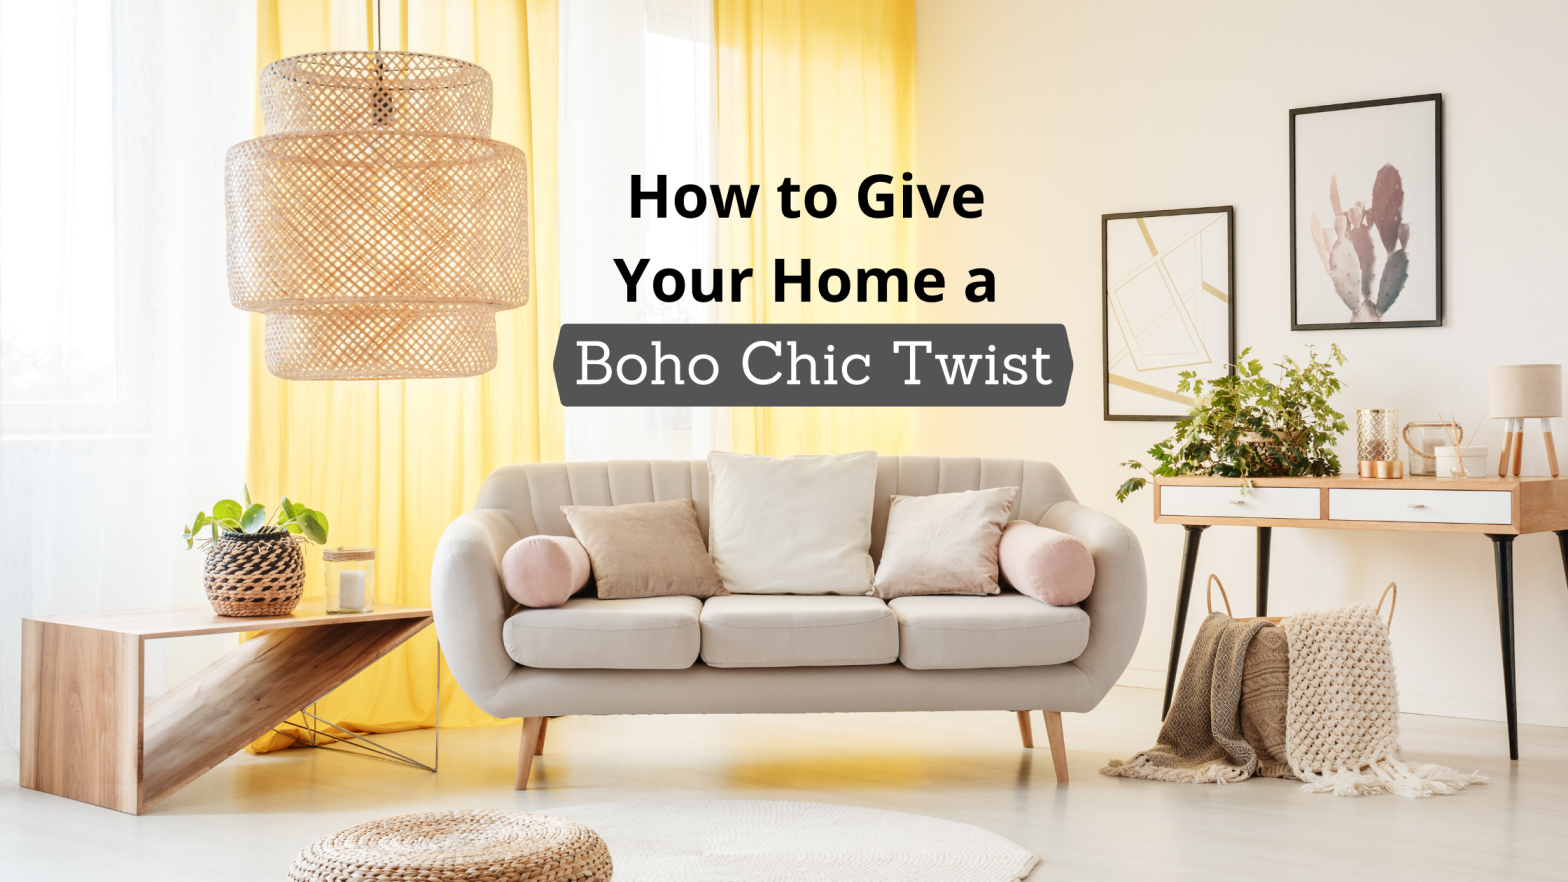 How to Give Your Home a Boho Chic Twist